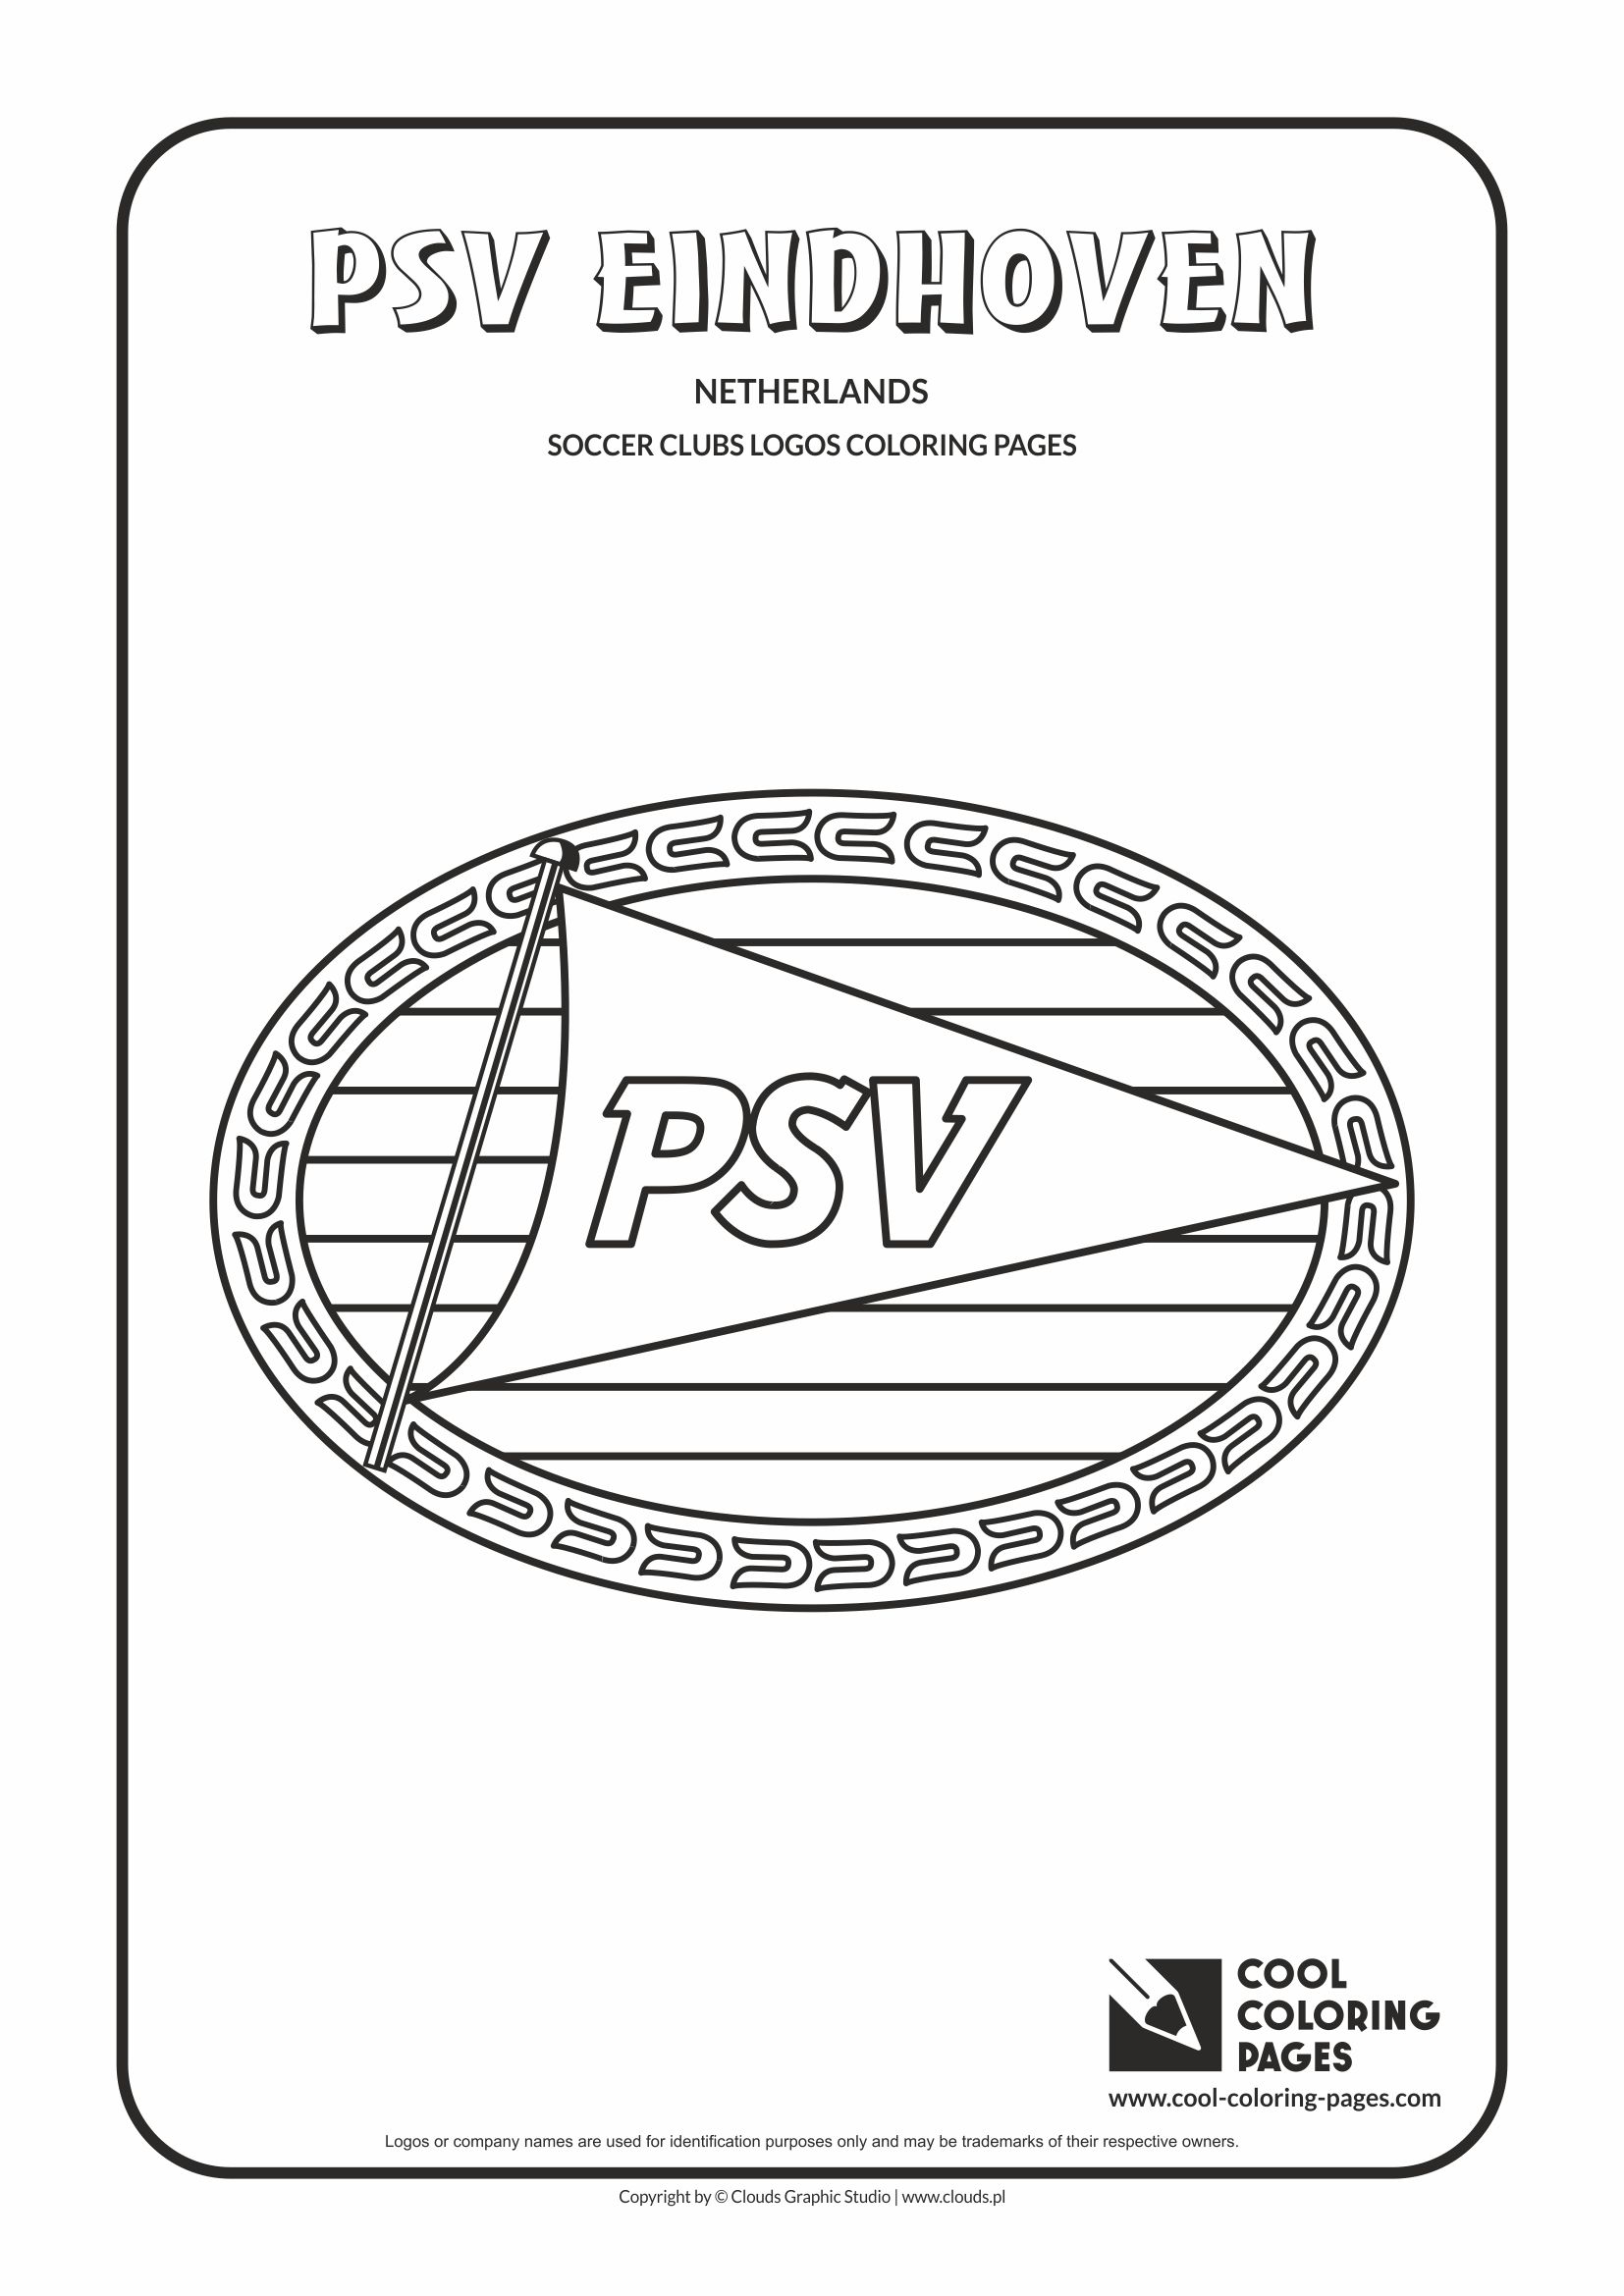 Download Cool Coloring Pages PSV Eindhoven logo coloring page ...